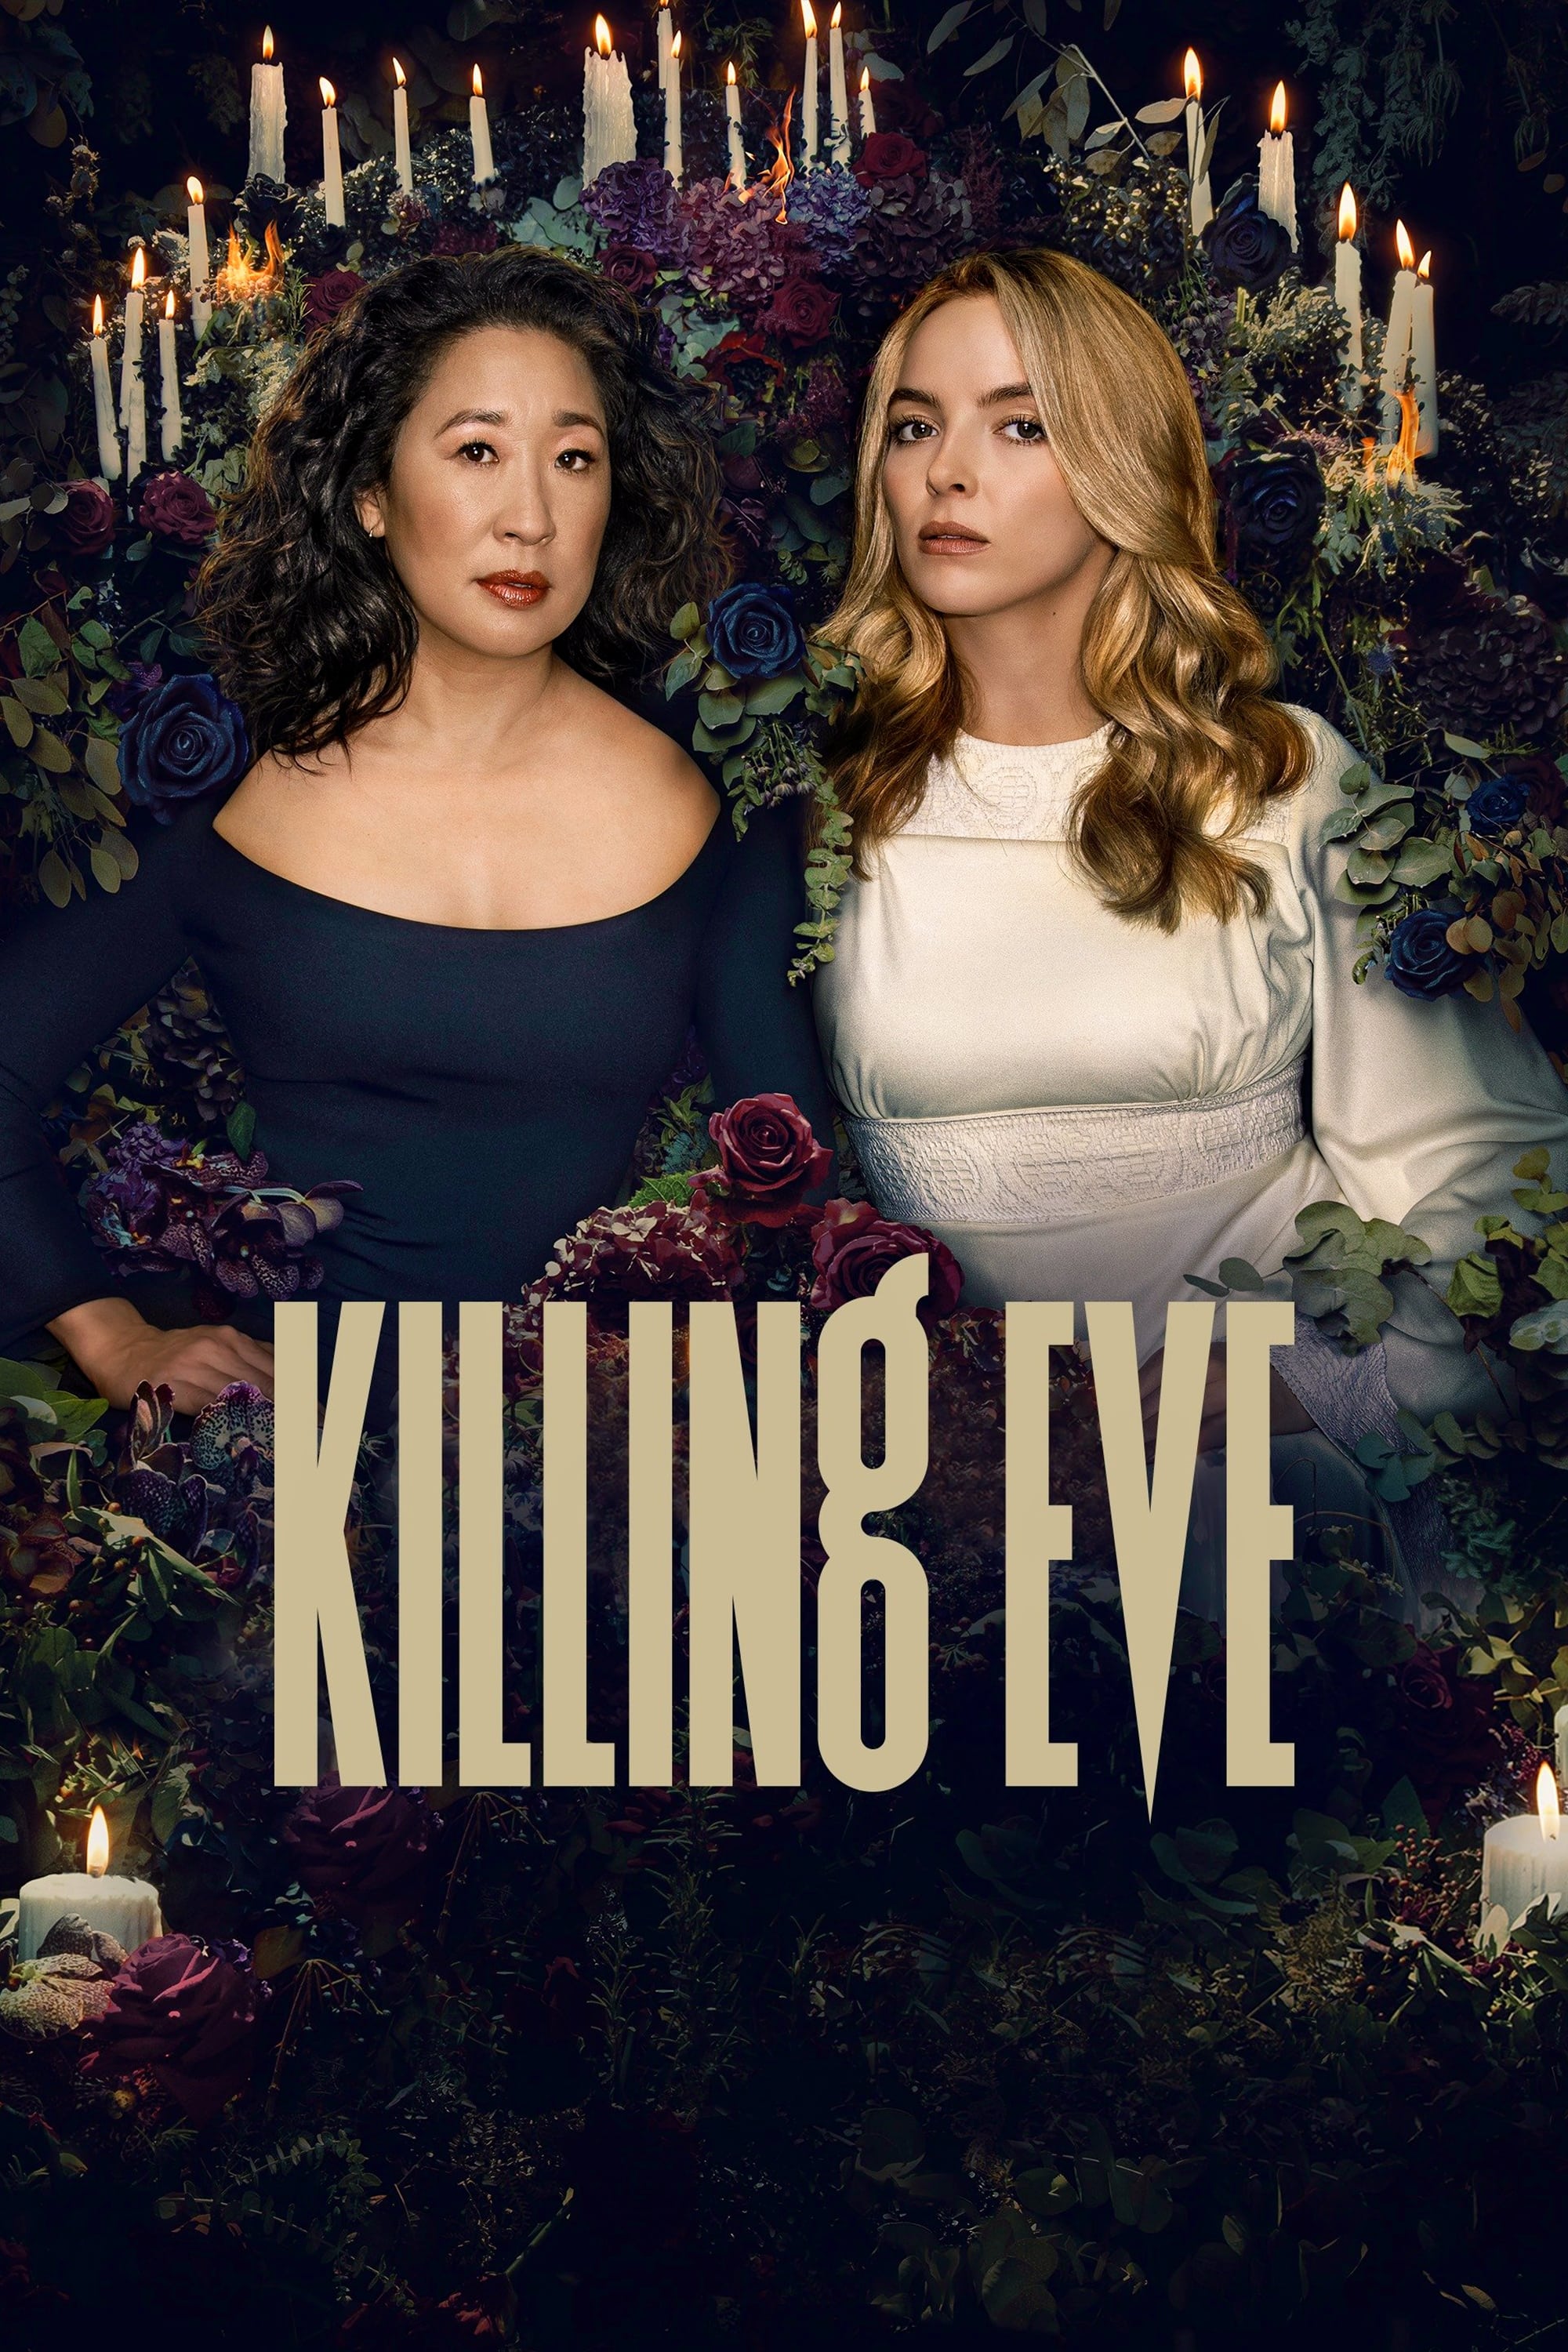 Killing Eve TV Shows About Assassin